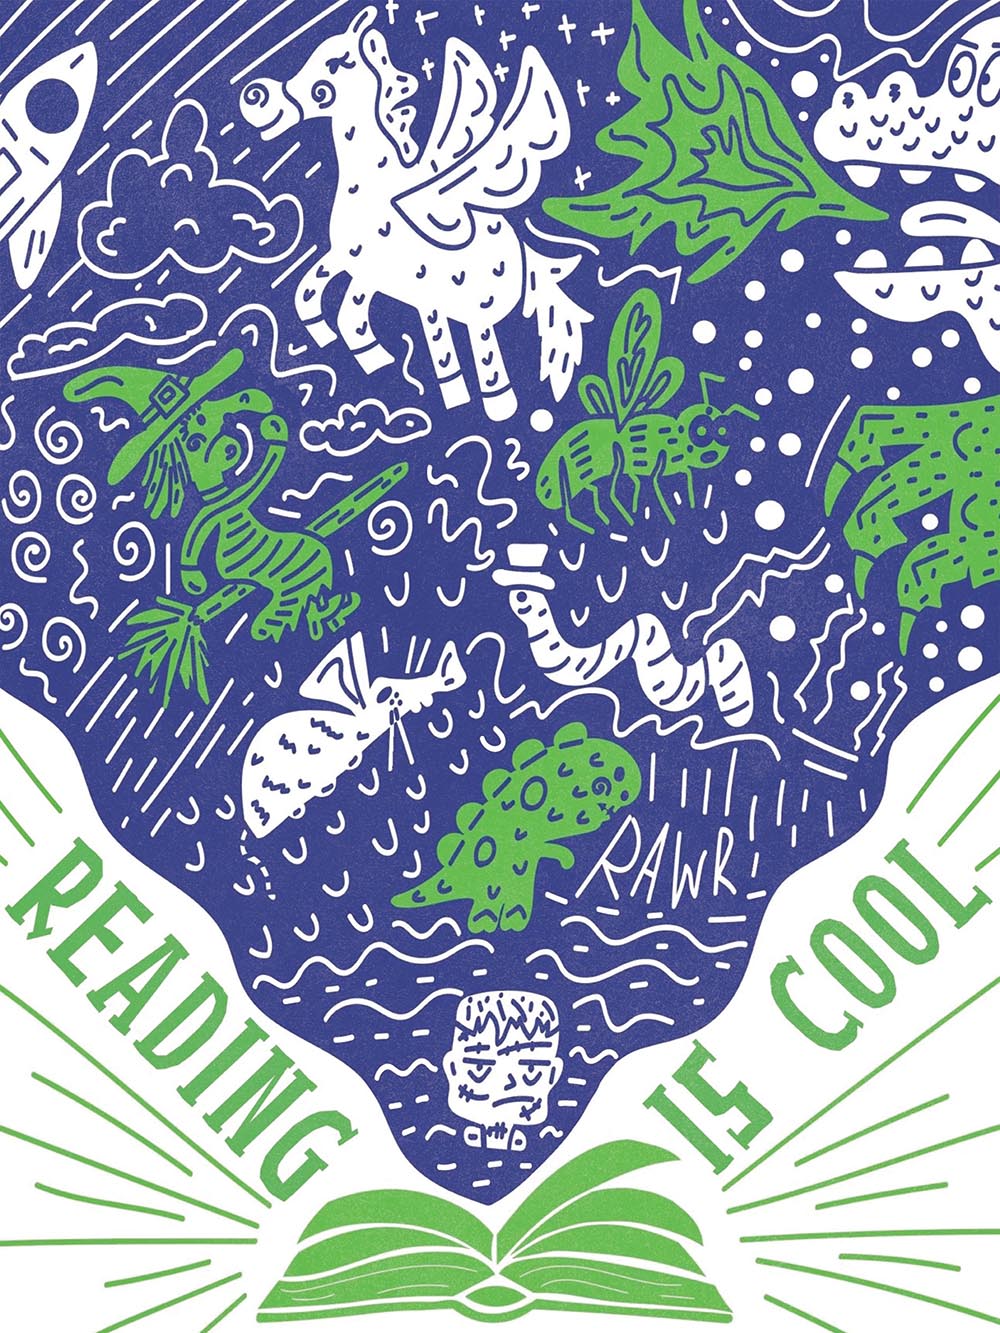 Reading is cool illustrated poster